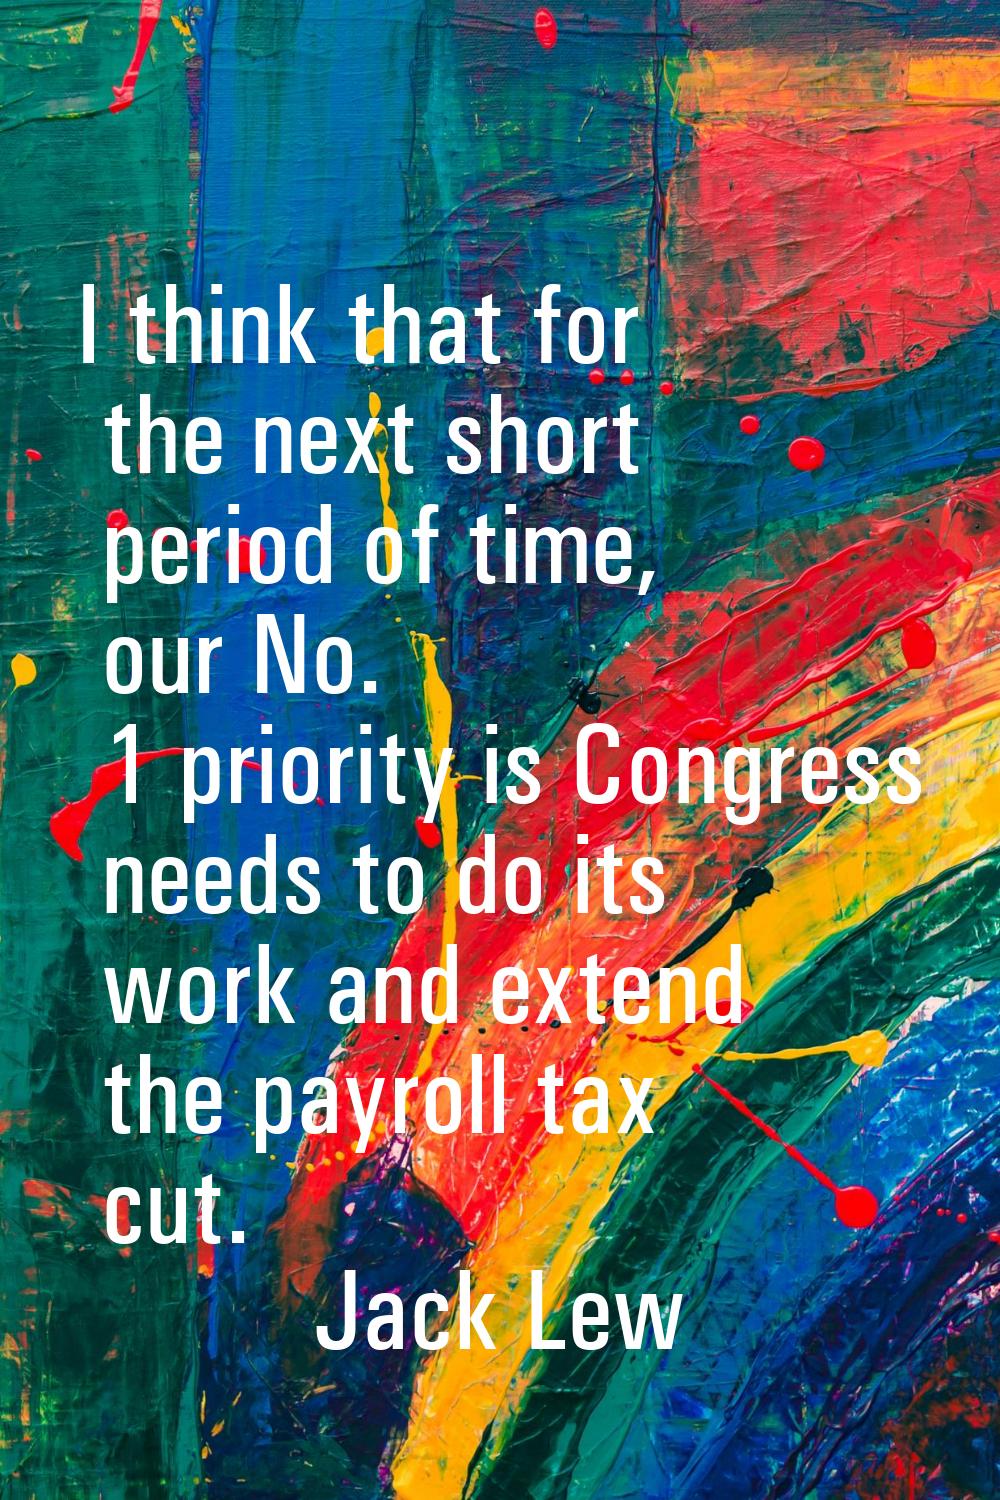 I think that for the next short period of time, our No. 1 priority is Congress needs to do its work